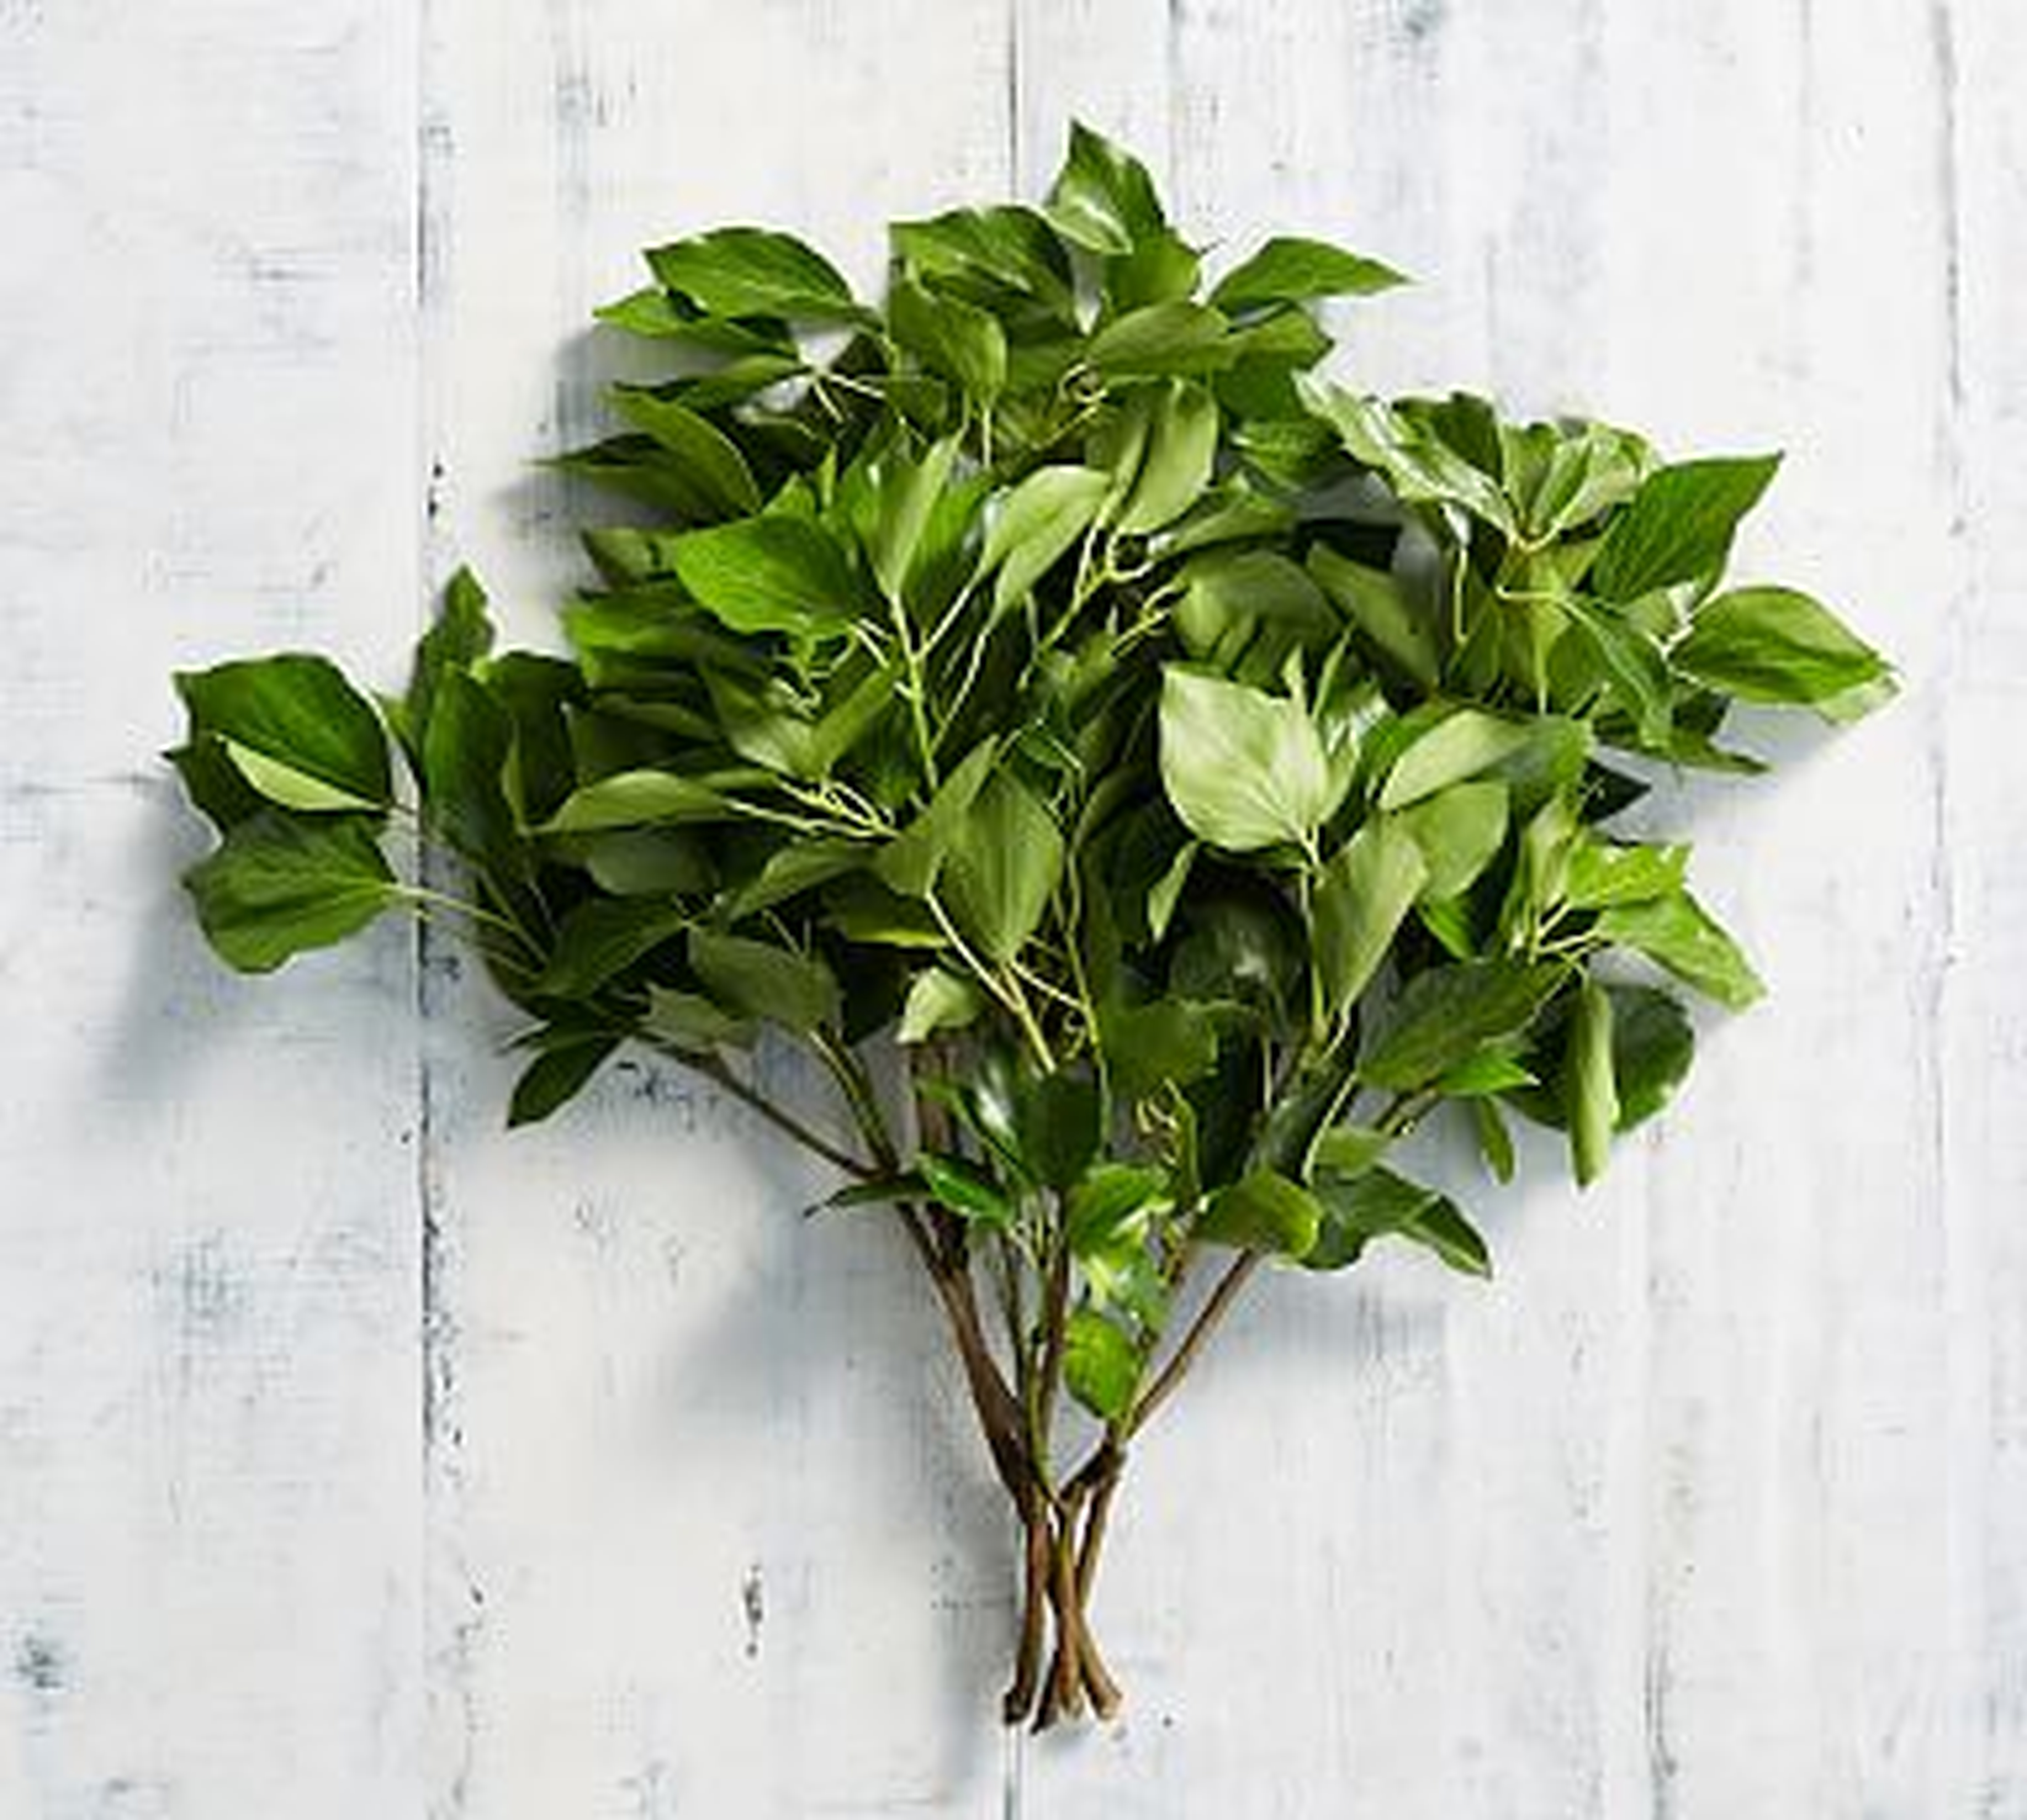 Live Bush Ivy Bunches - Pottery Barn